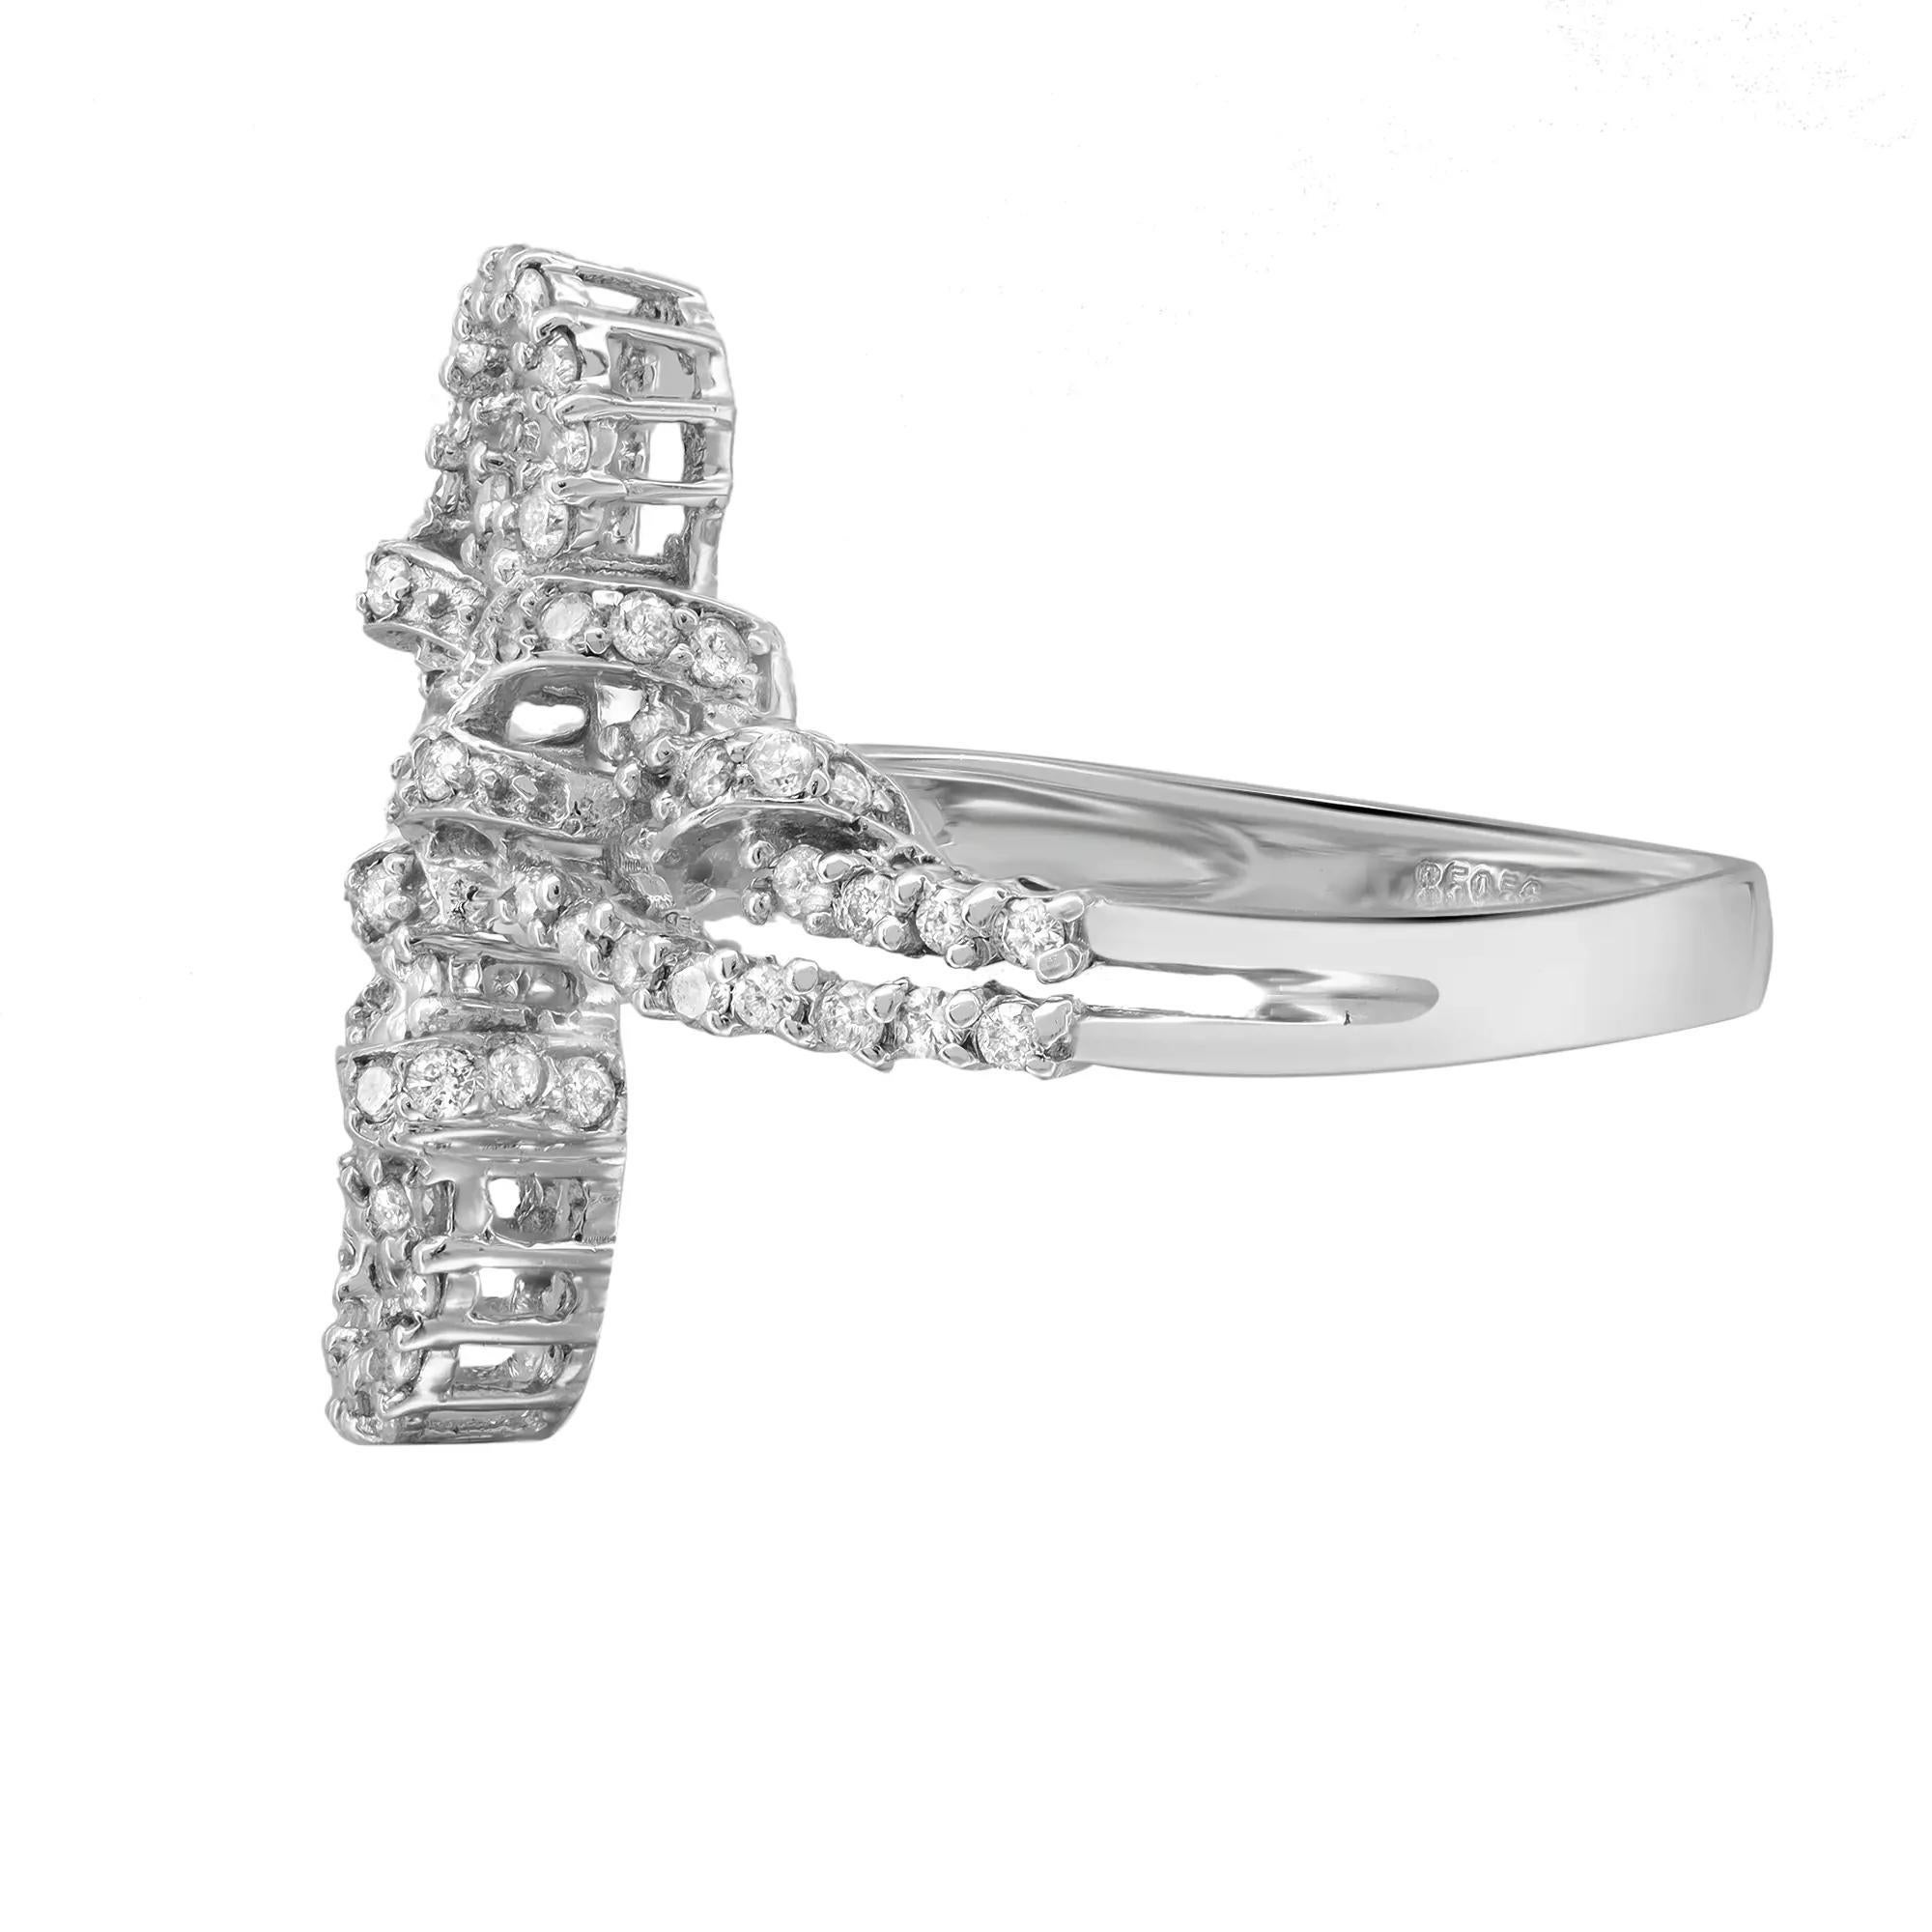 0.62cttw Round Cut Diamond Ladies Cocktail Ring 14k White Gold In New Condition For Sale In New York, NY